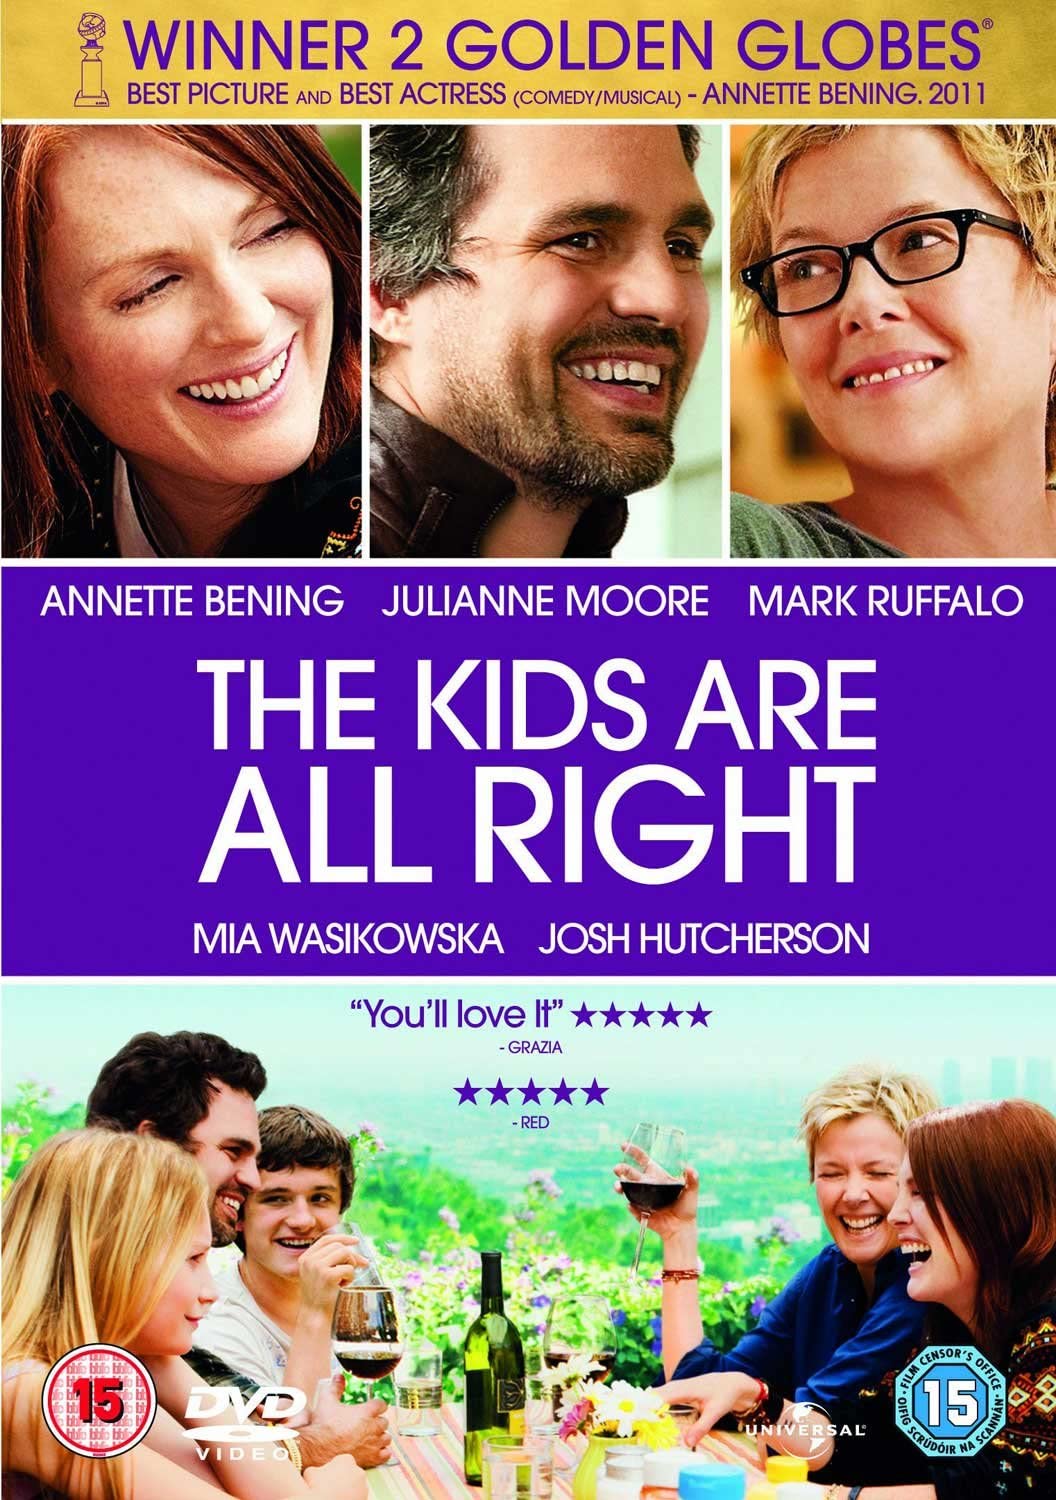 The Kids Are All Right  -Drama/Romance [DVD]